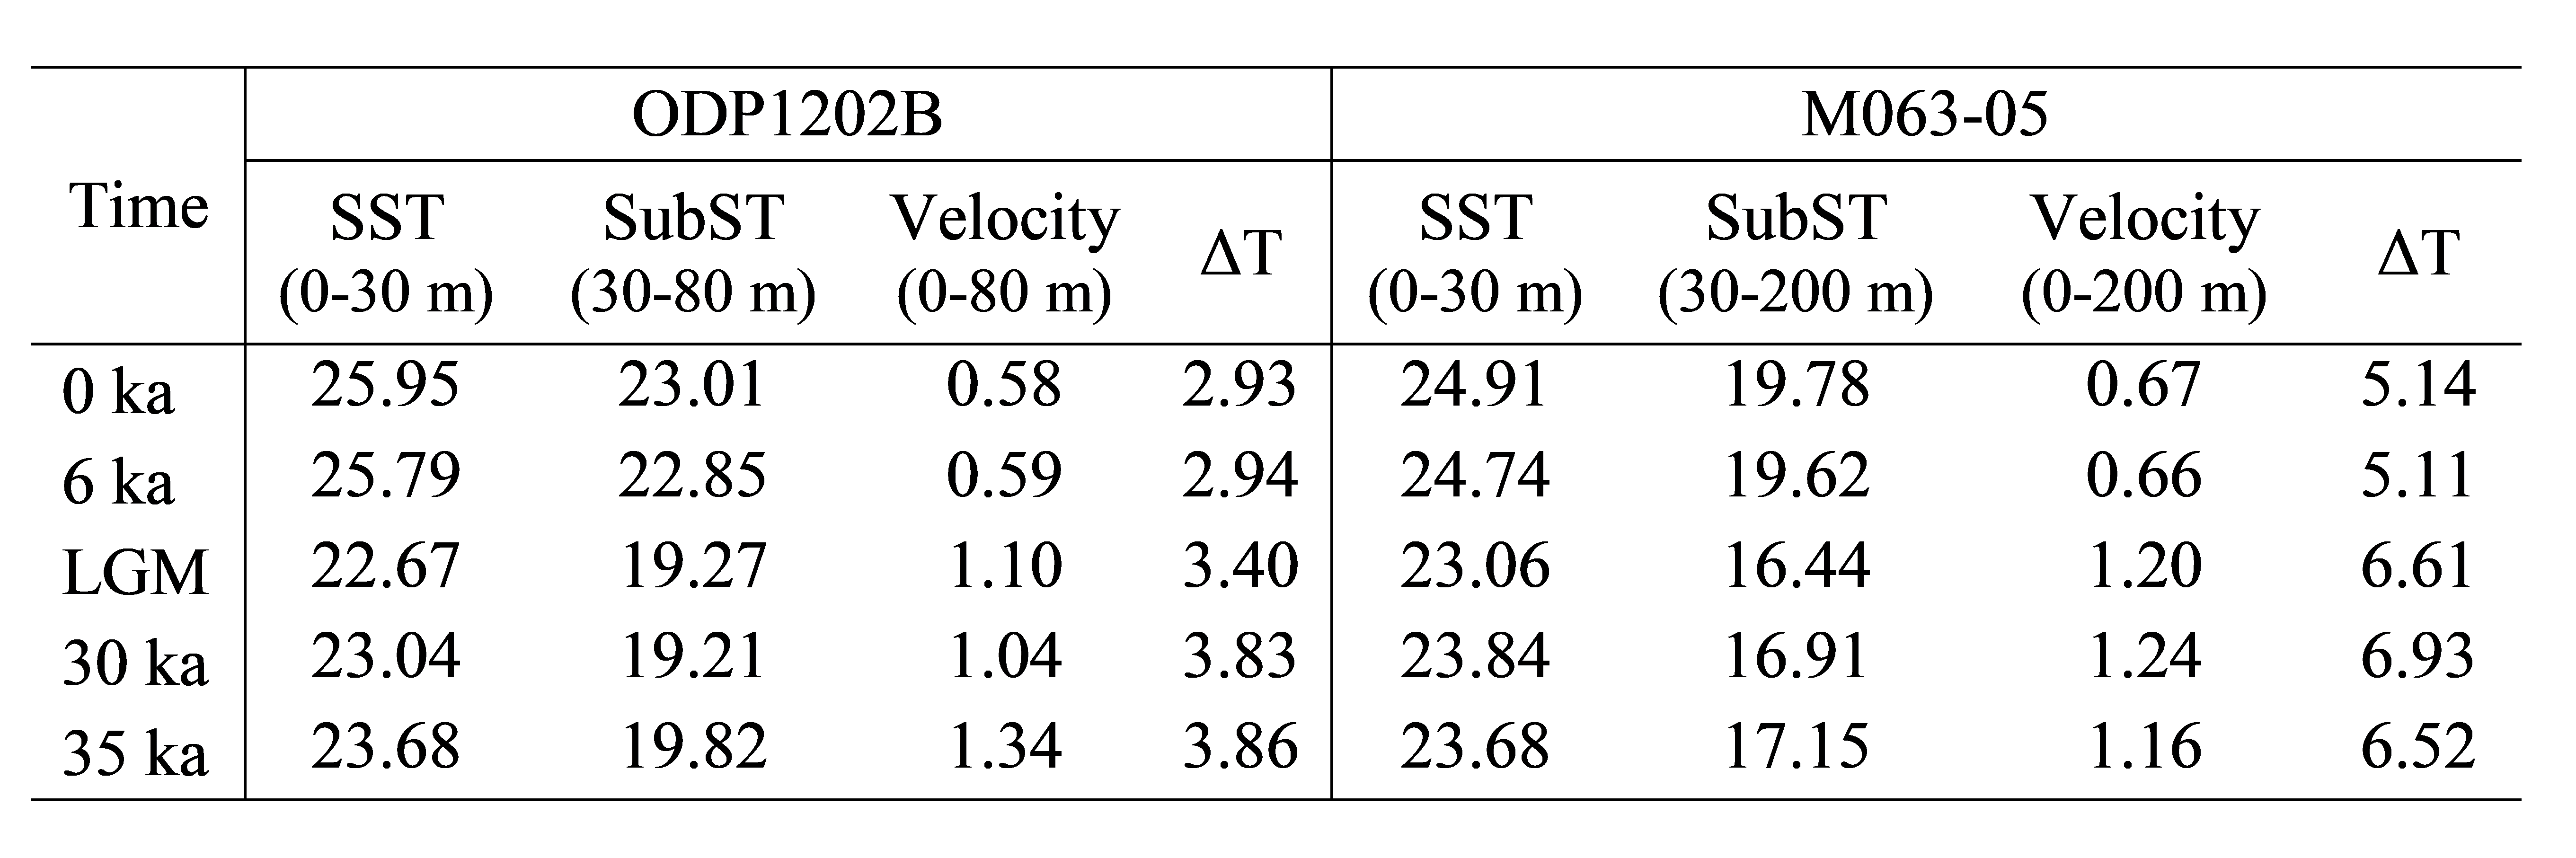 Modeled sea surface temperature (SST), subsurface temperature (SubST), their difference (i.e., ΔT = SST – SubST; unit: ℃), and surface velocity (unit: m/s) at the ODP1202B and M063-05 sediment cores.